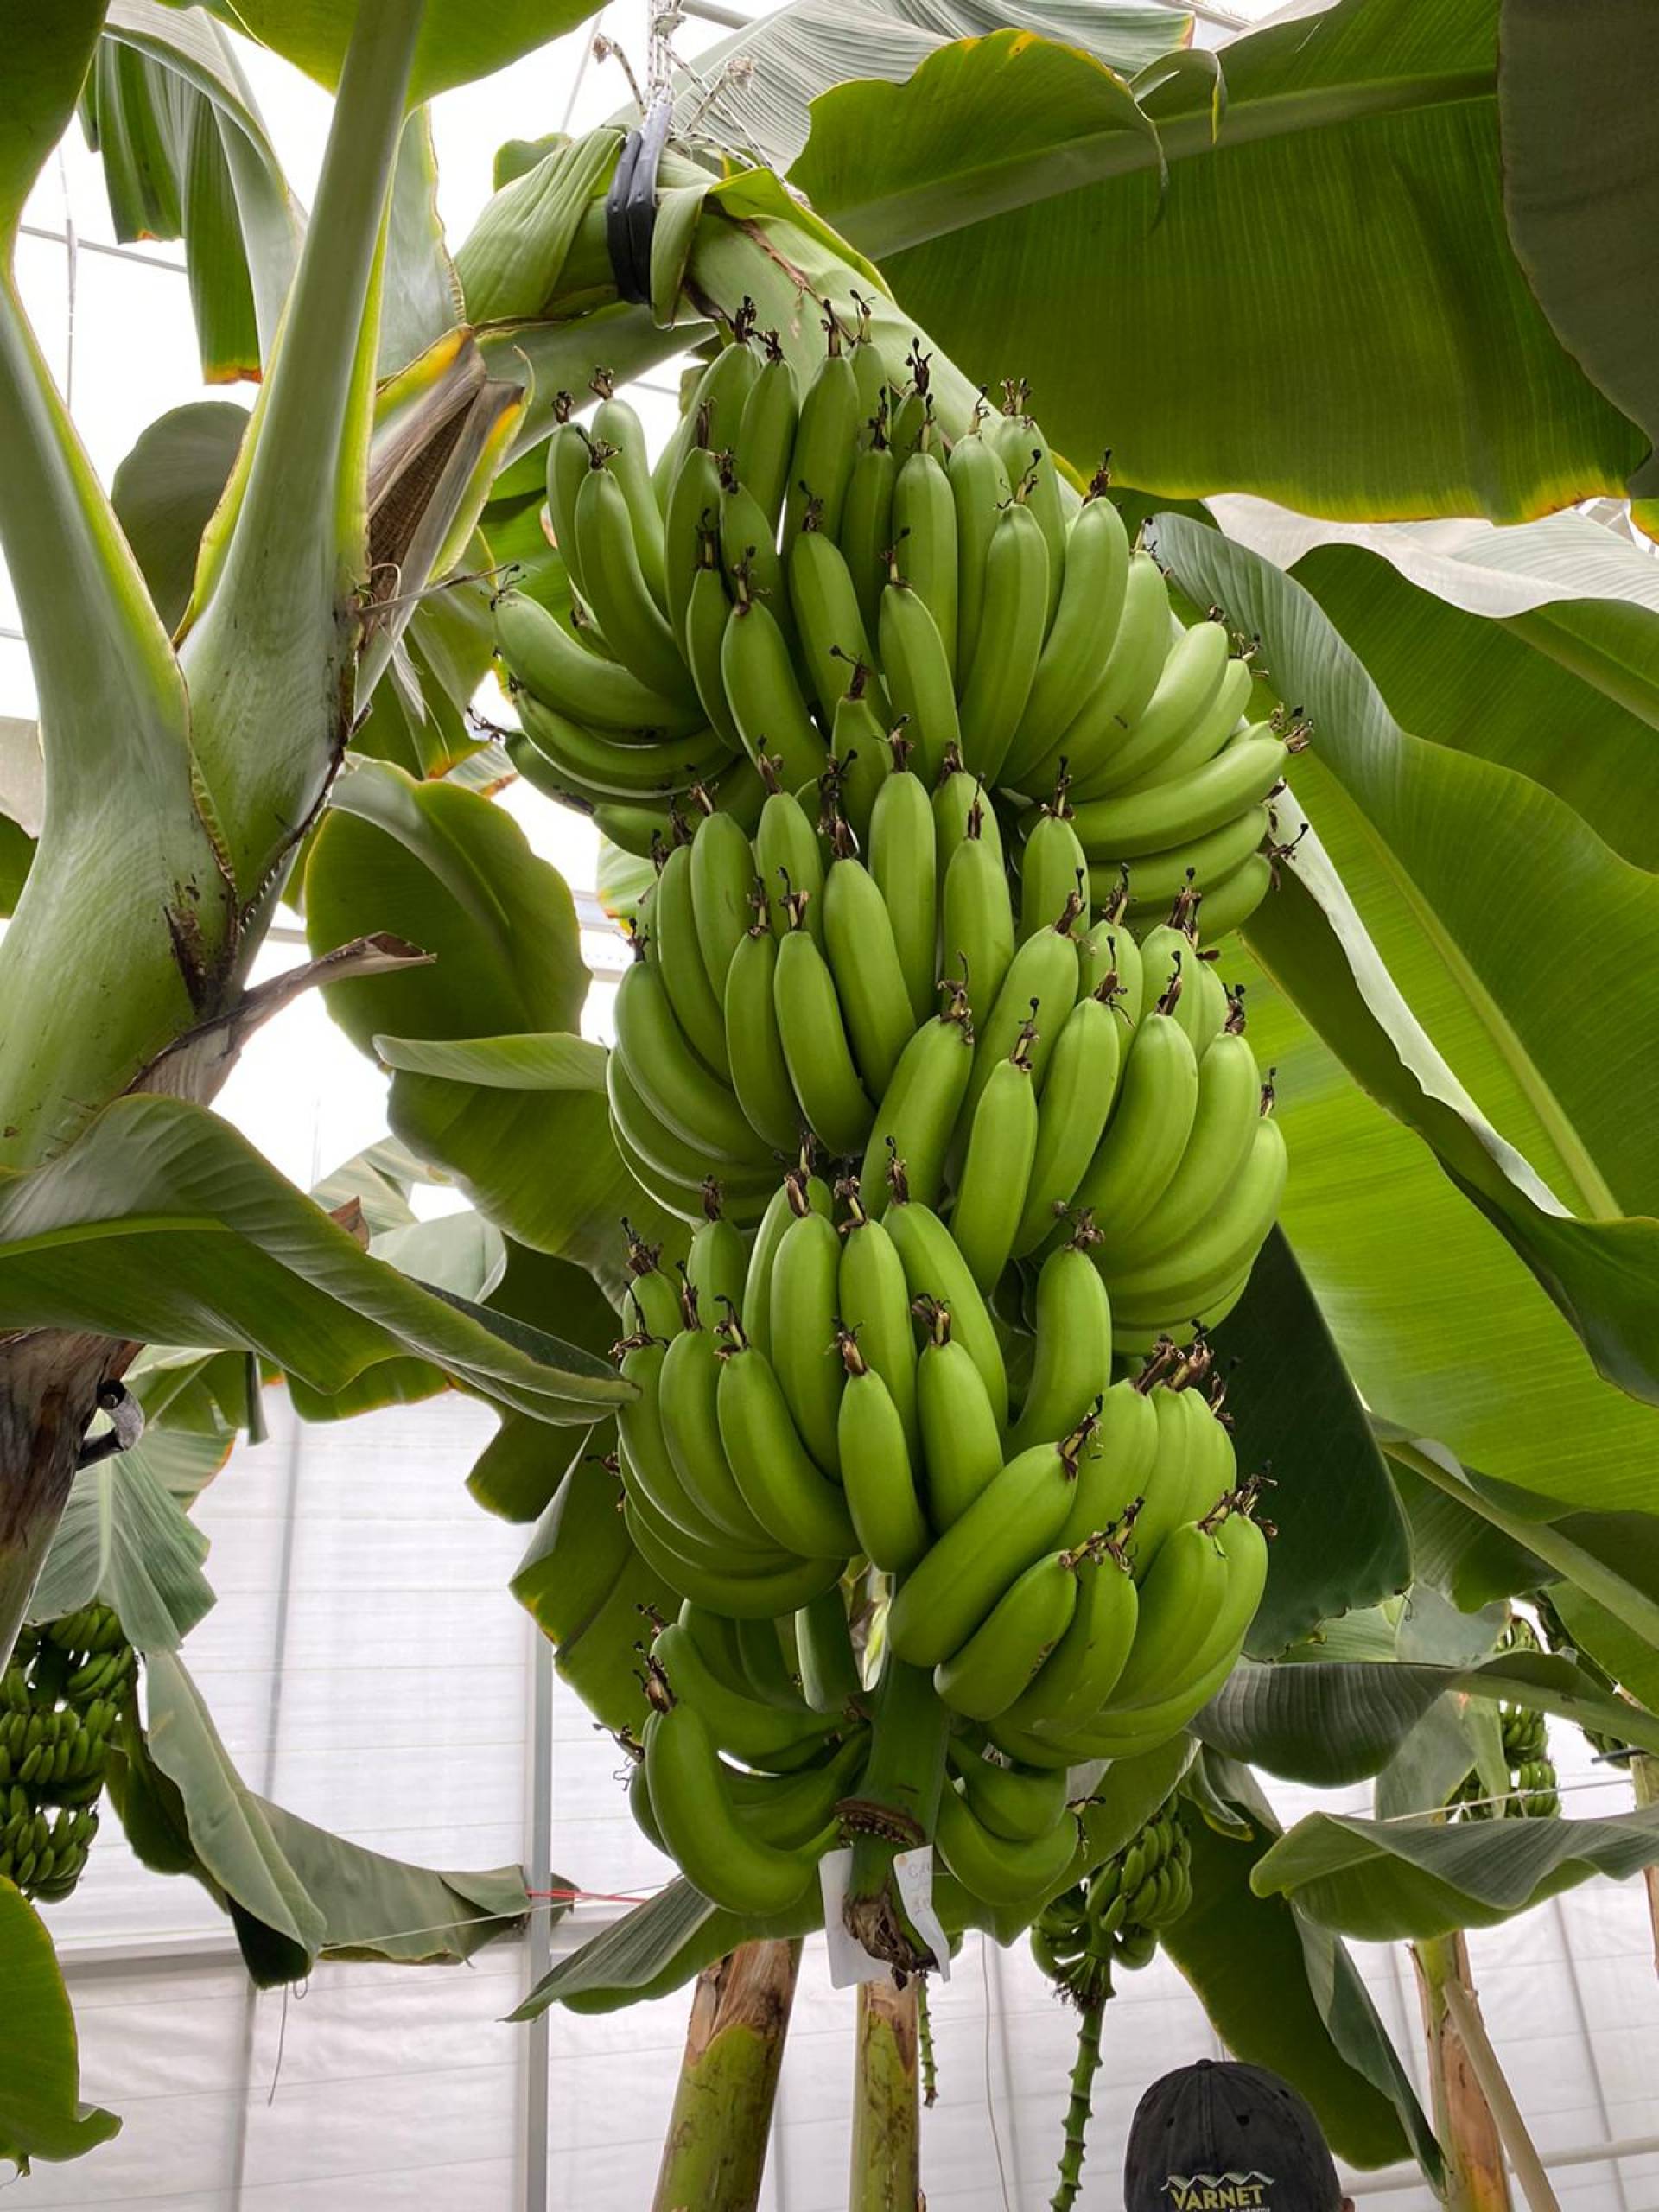 We have successfully completed our banana growing project with the hydroponic farming technique in pots.